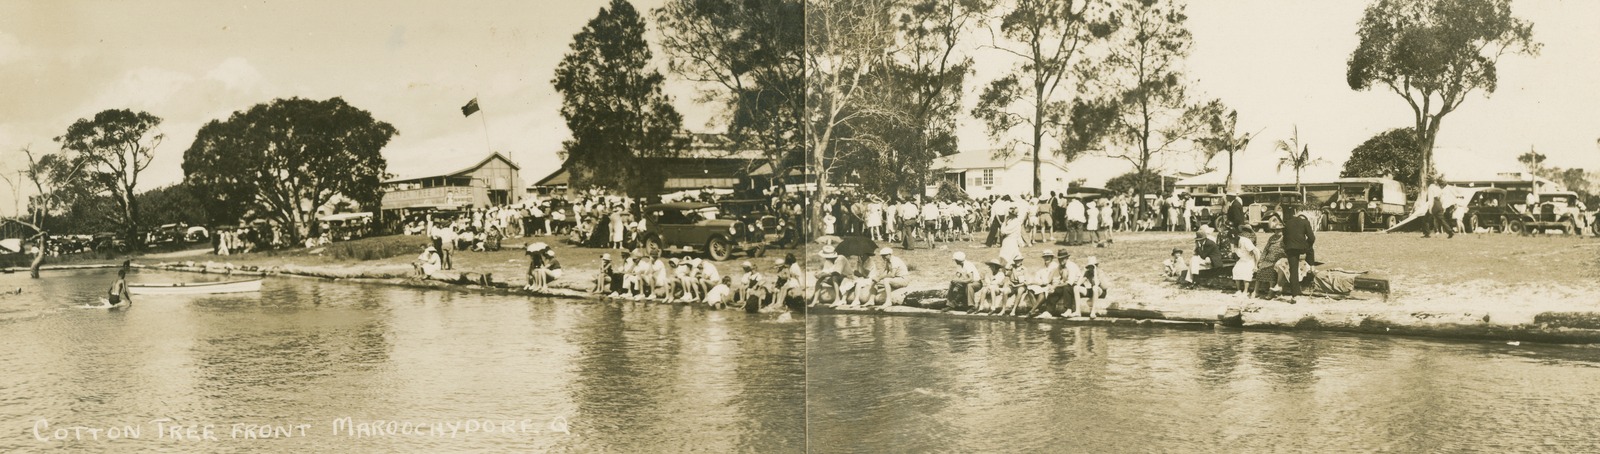 Sepia panorama image of crowds of holiday-makers gathered on the banks of the Maroochy River at Cotton Tree, Maroochydore, Queensland, ca. 1928